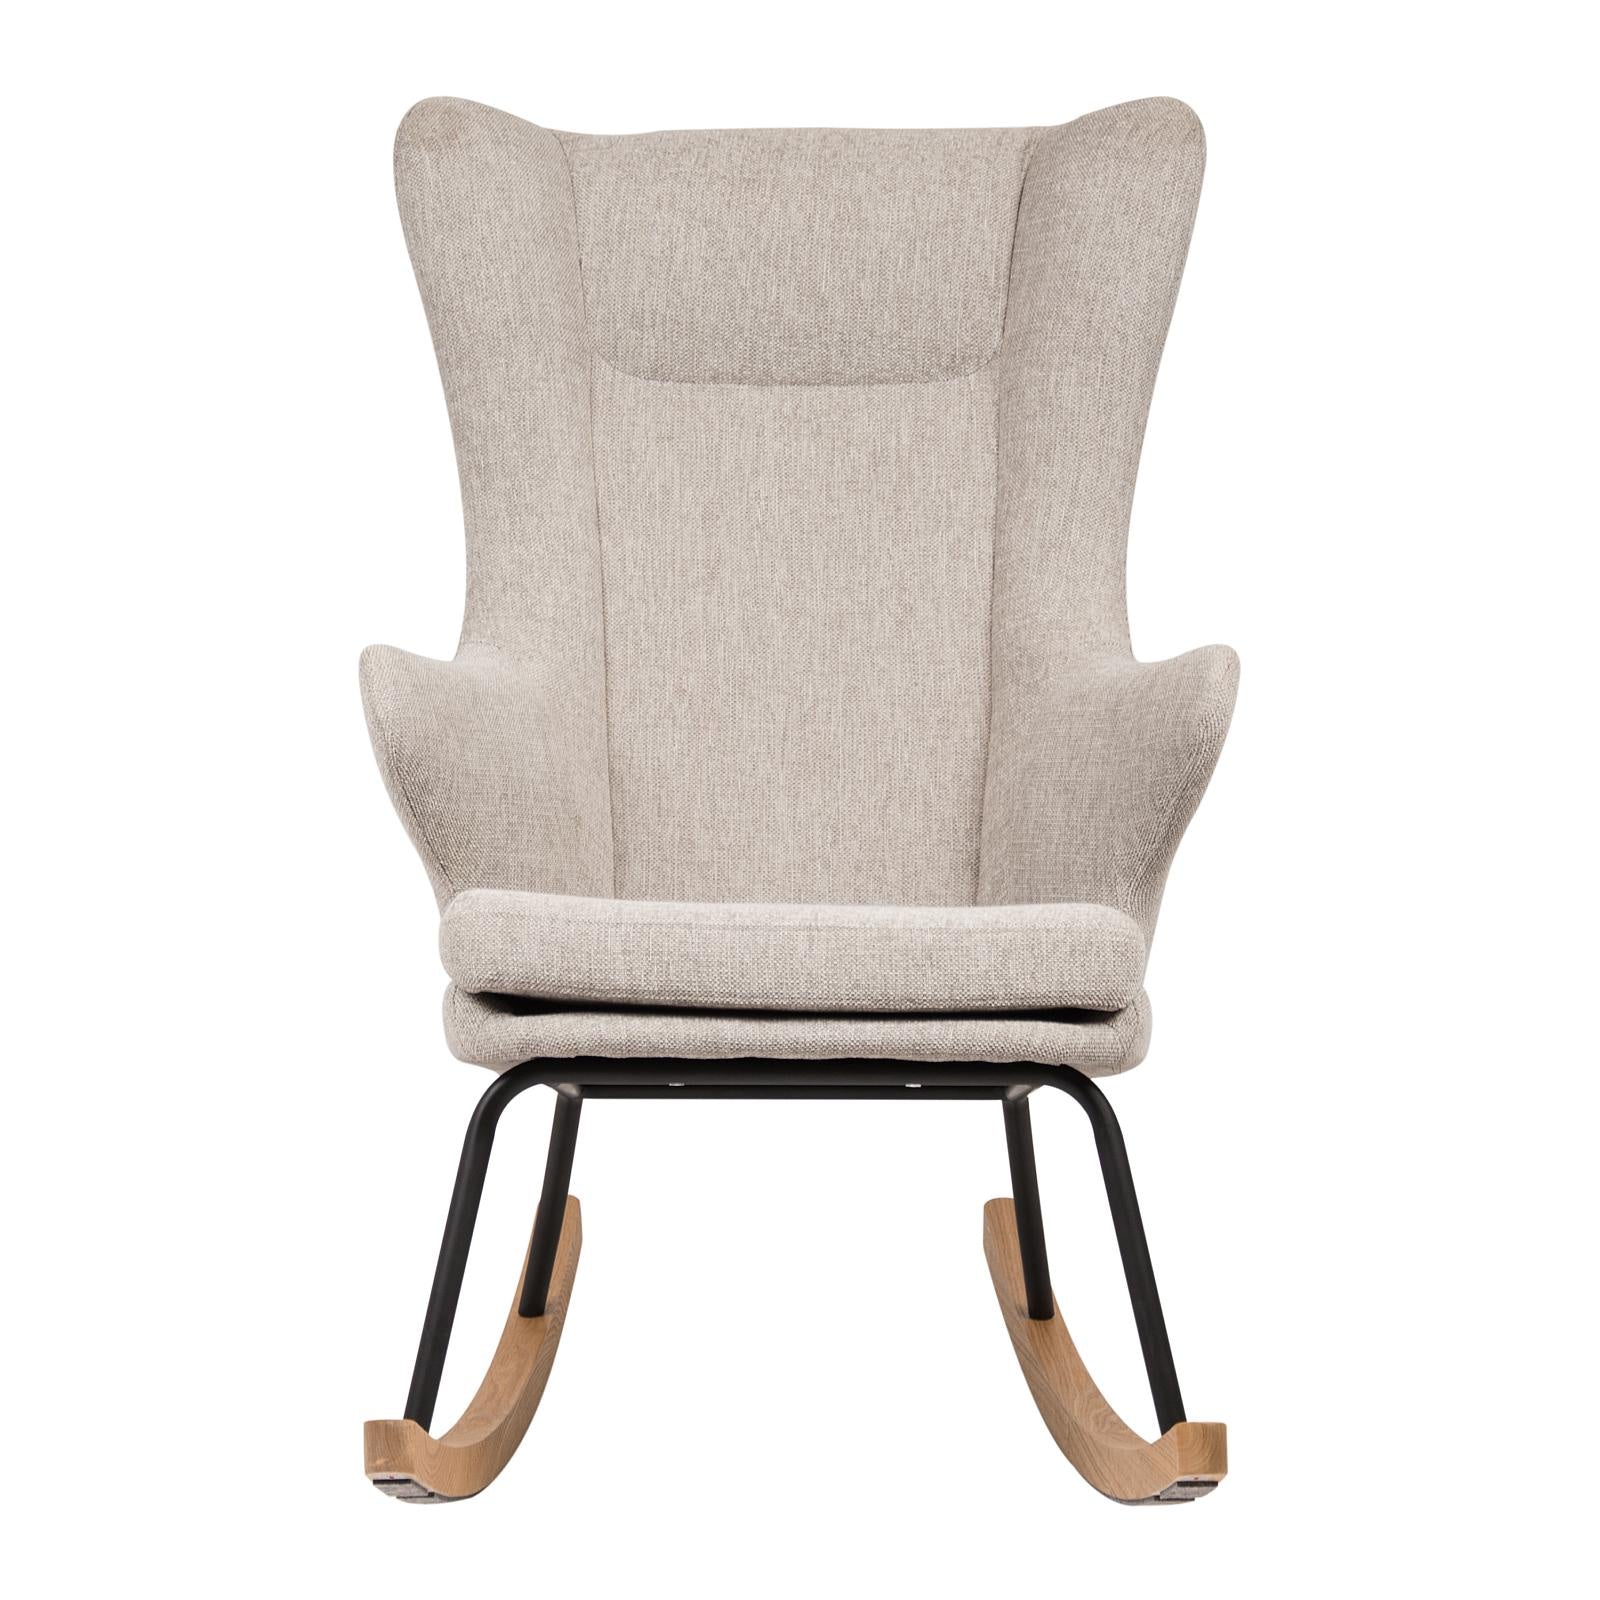 Quax Deluxe Rocking Chair - Sand Grey